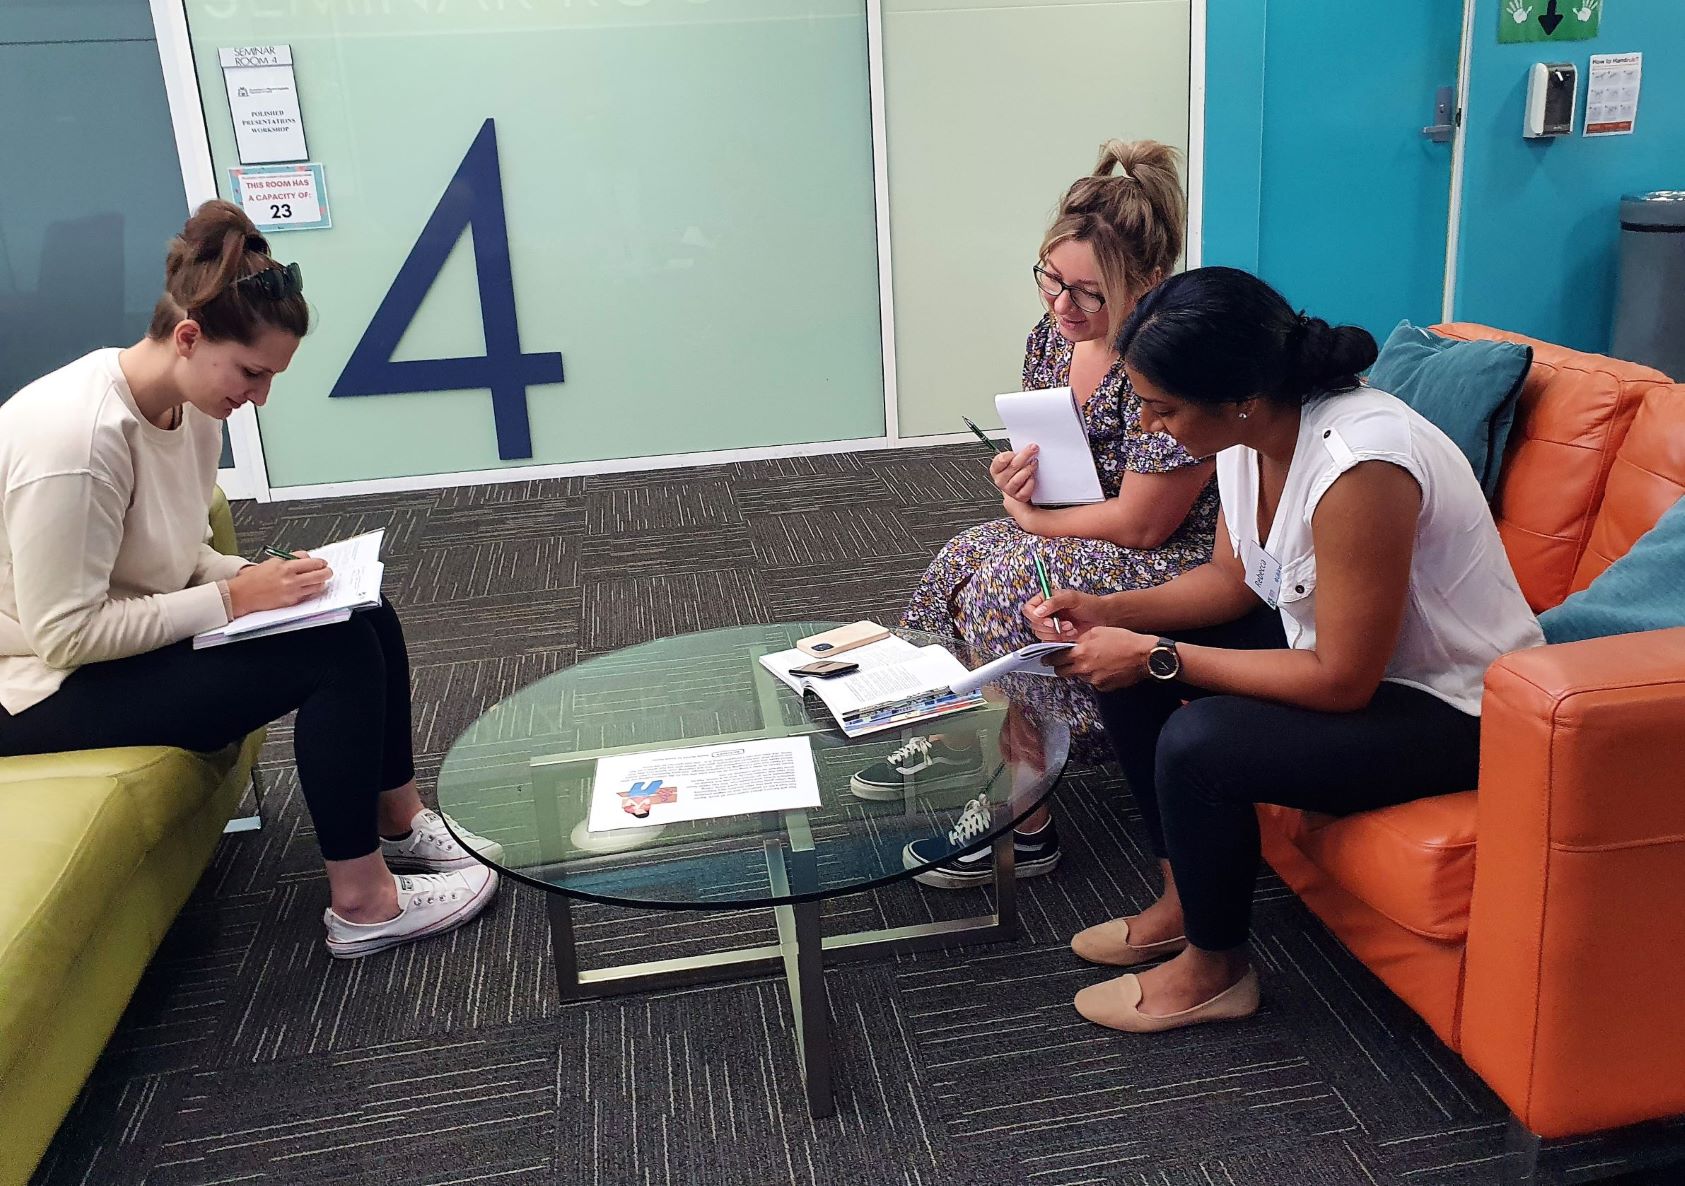 Three mental health course participants sit on a green and an orange couch, one leaning on a glass coffee table, workshopping course materials. 